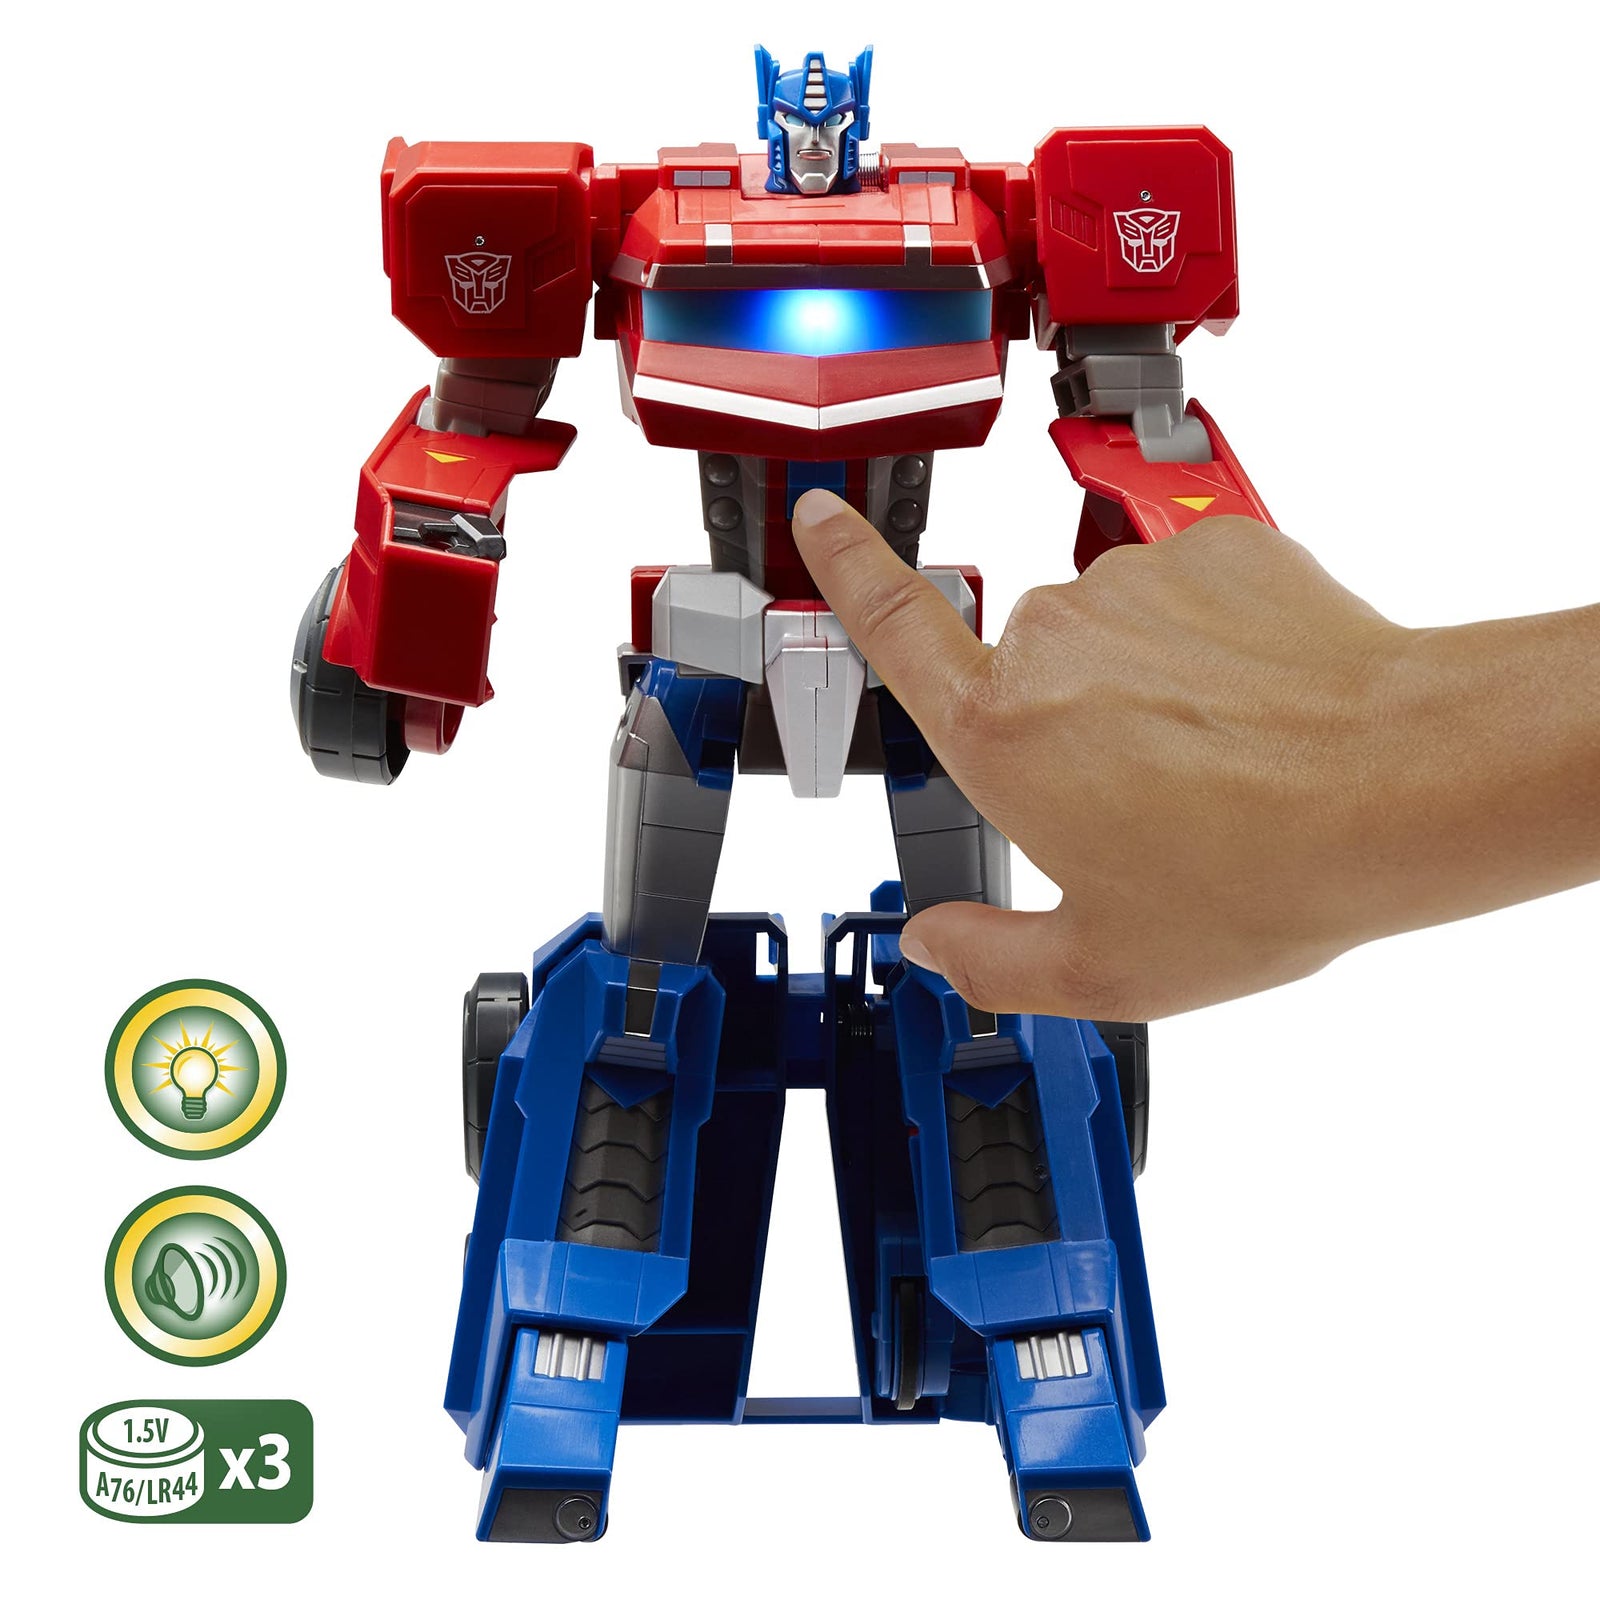 Transformers Toys Bumblebee Cyberverse Adventures Dinobots Unite Roll N’ Change Optimus Prime Push-to-Convert Action Figure, 6 and Up, 10-inch